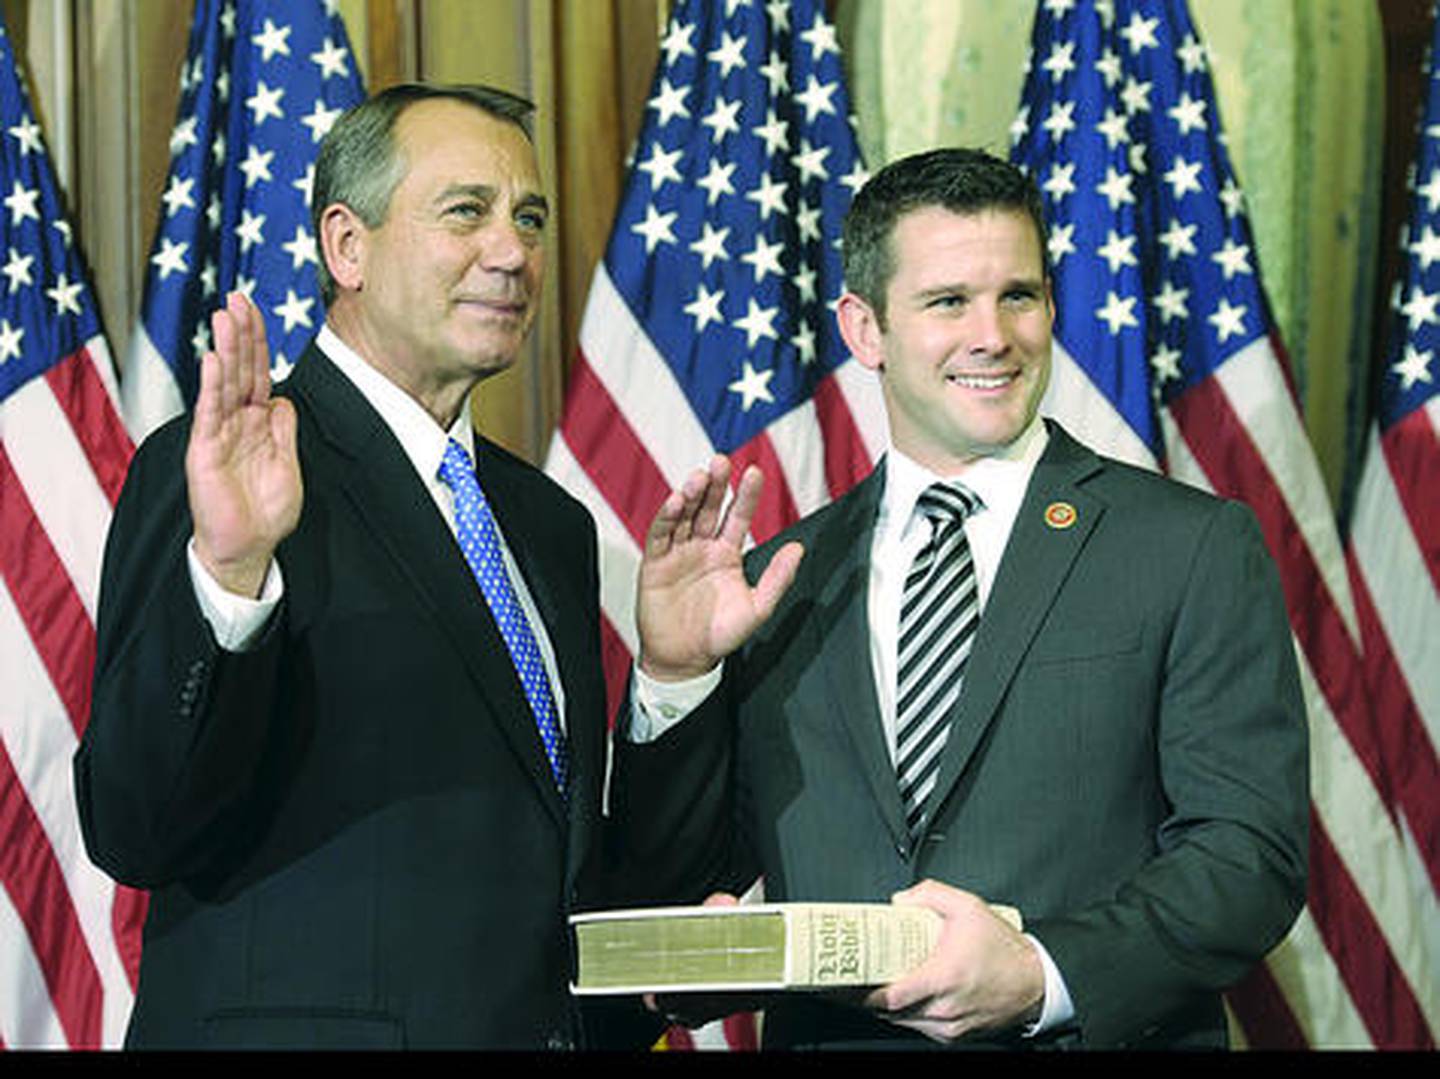 House Speaker John Boehner of Ohio (left) performs a mock swearing in for Rep. Adam Kinzinger on Thursday on Capitol Hill in Washington as the 113th Congress began. Kinzinger now represents the 16th Congressional District.